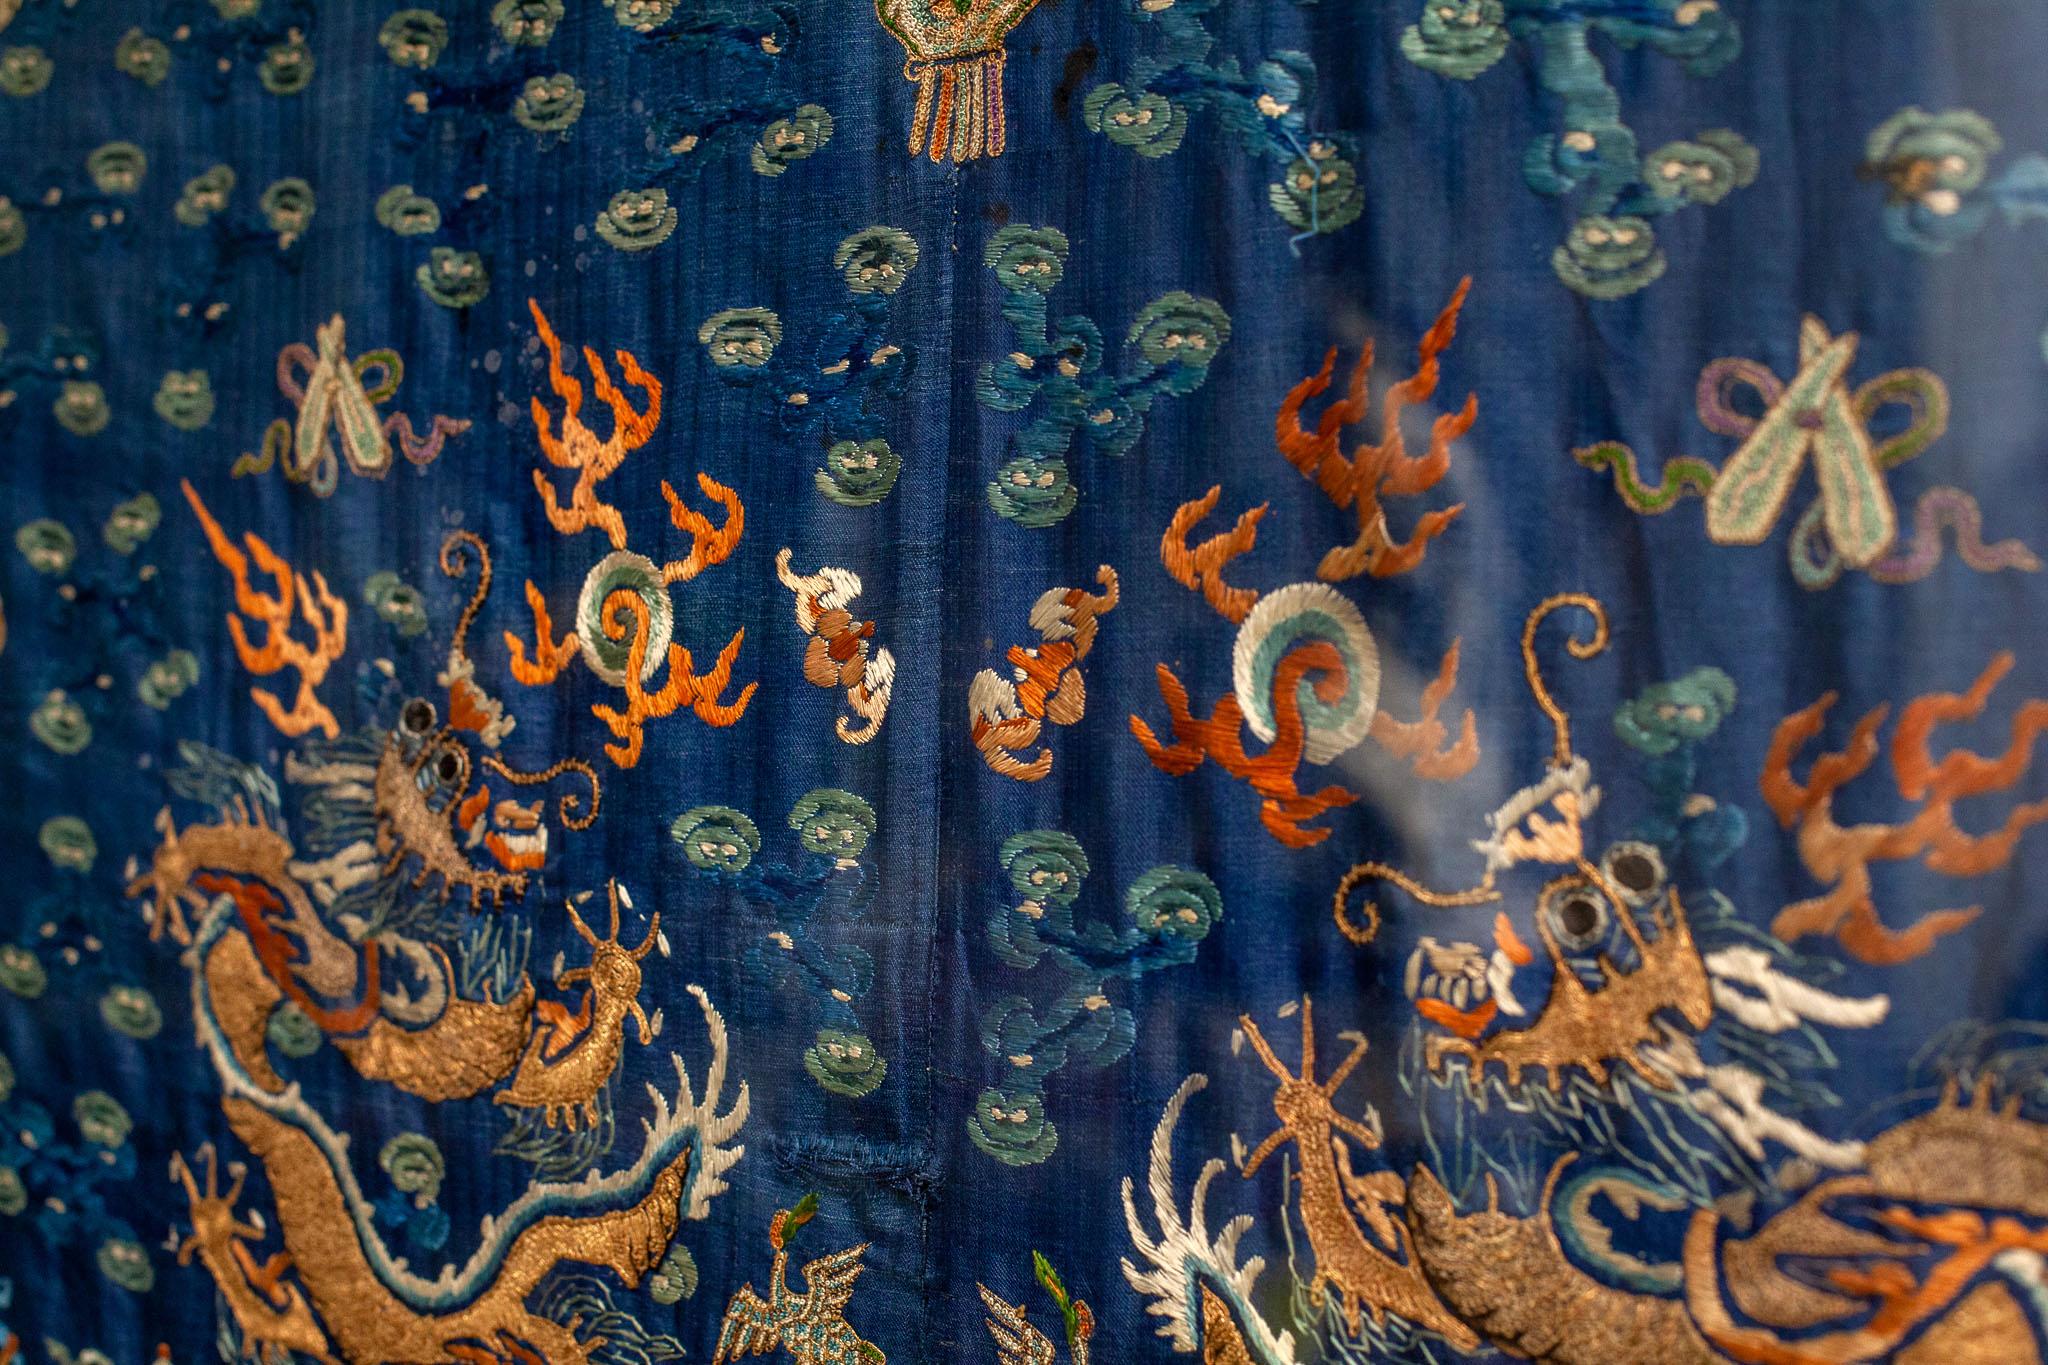 Qing Chinese Imperial Court Kesi Dragon Robe 14